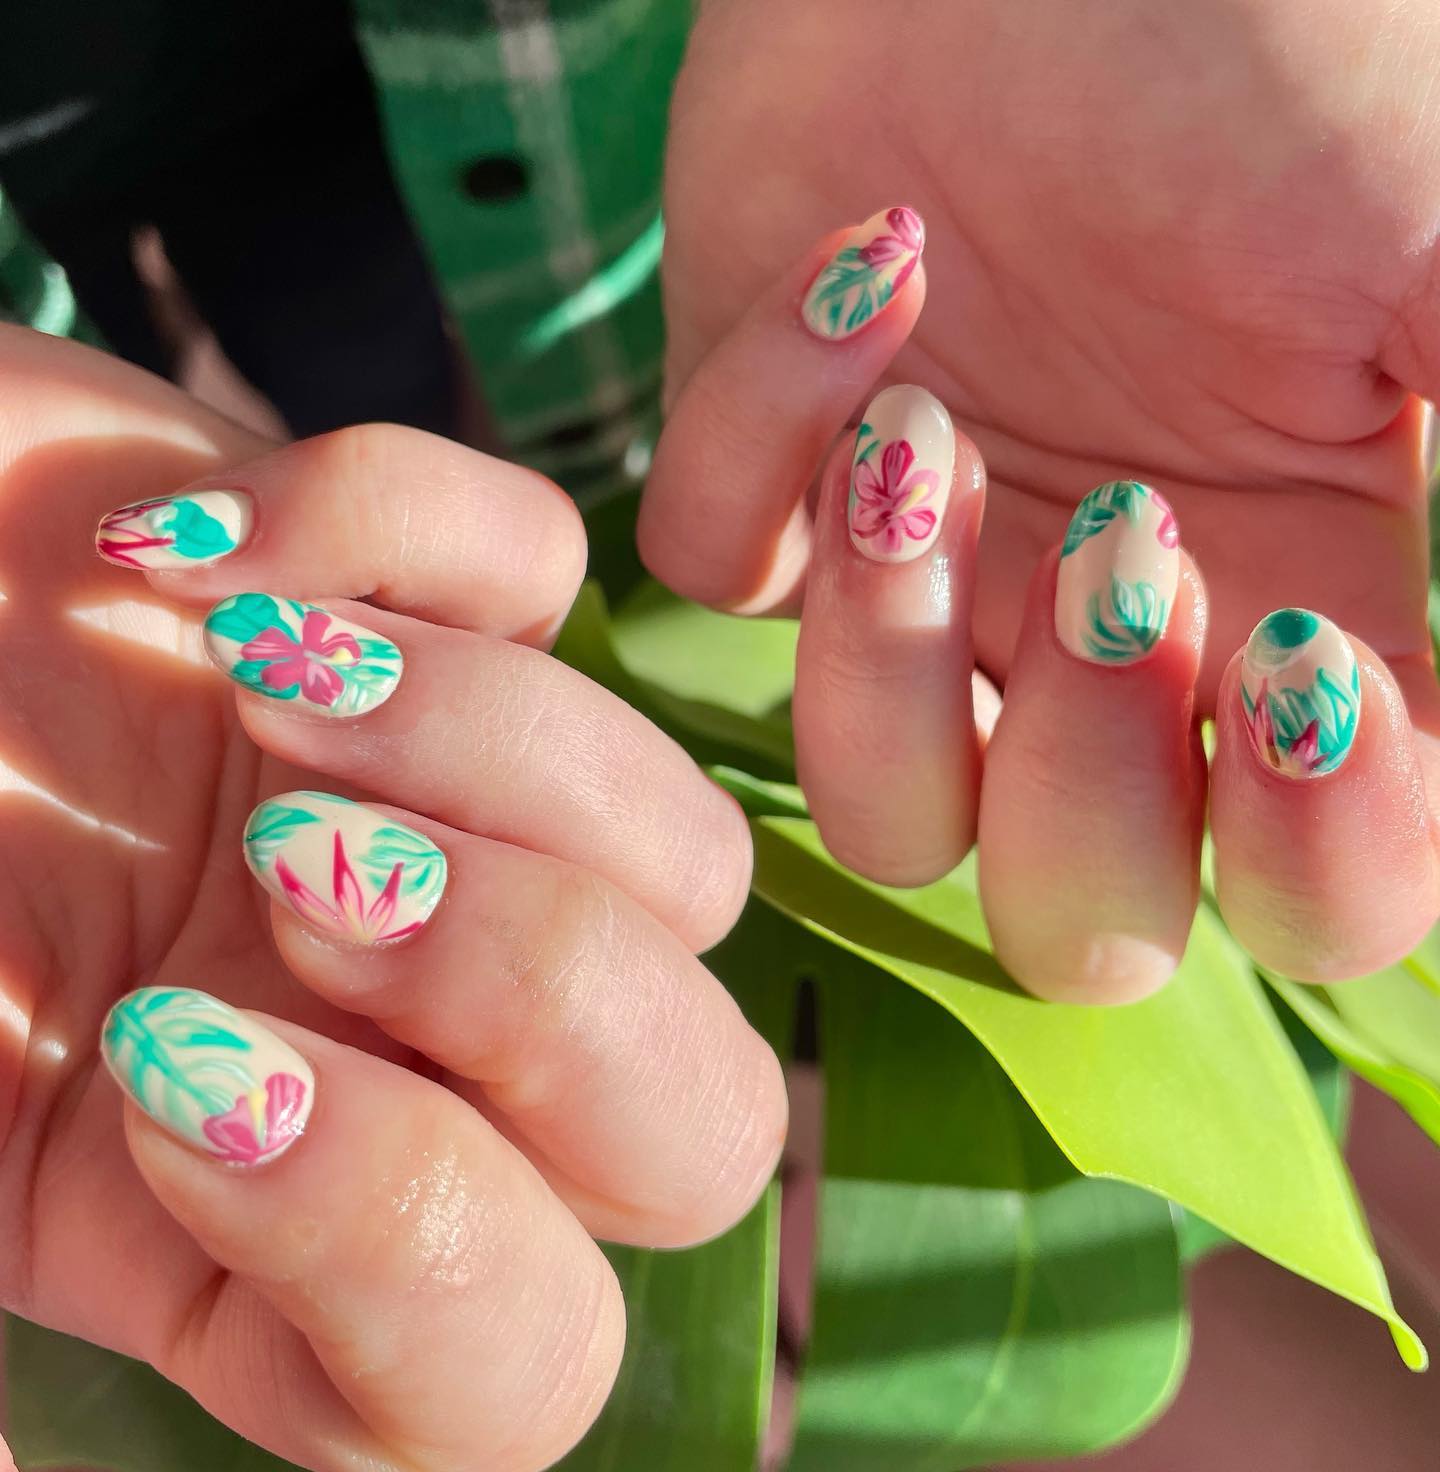 2019 Summer Acrylic, Matte and Polished Nail Designs Vol 1 - Womens ideas